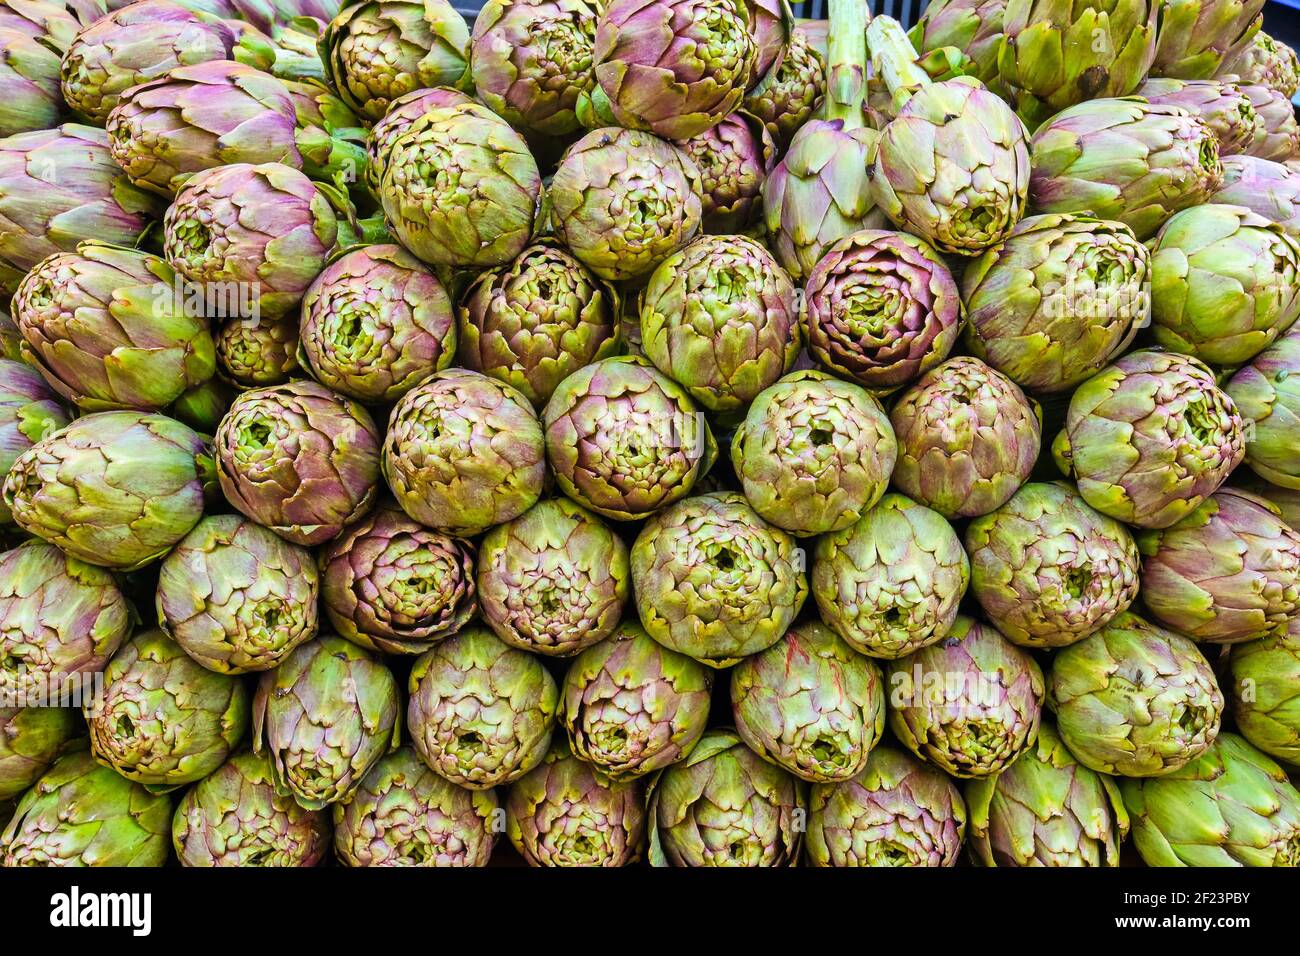 Pile of artichokes for sale at a market Stock Photo